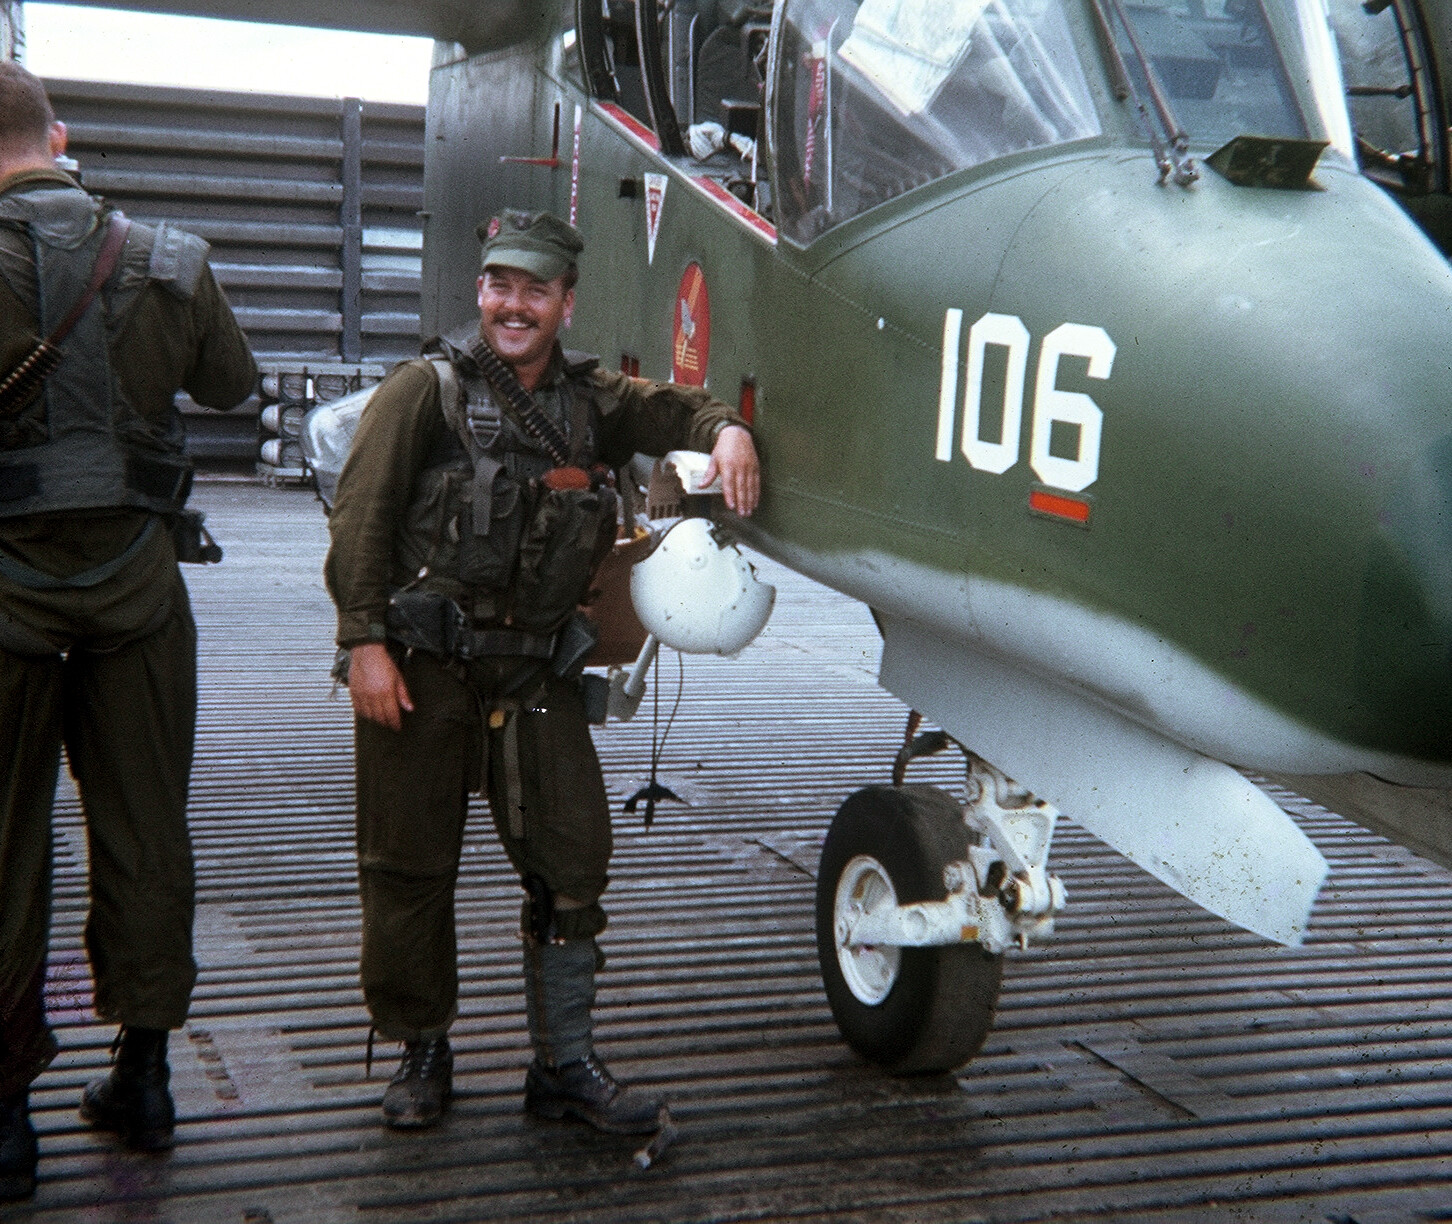 My father, Dan Sheehan, before heading out on a mission in his OV-10 Bronco, Binh Thuy, 1969. His squadron, VAL-4, was the only navy squadron flying the OV-10 in a close air support role. His missions in Vietnam bore striking similarities to mine in Iraq.